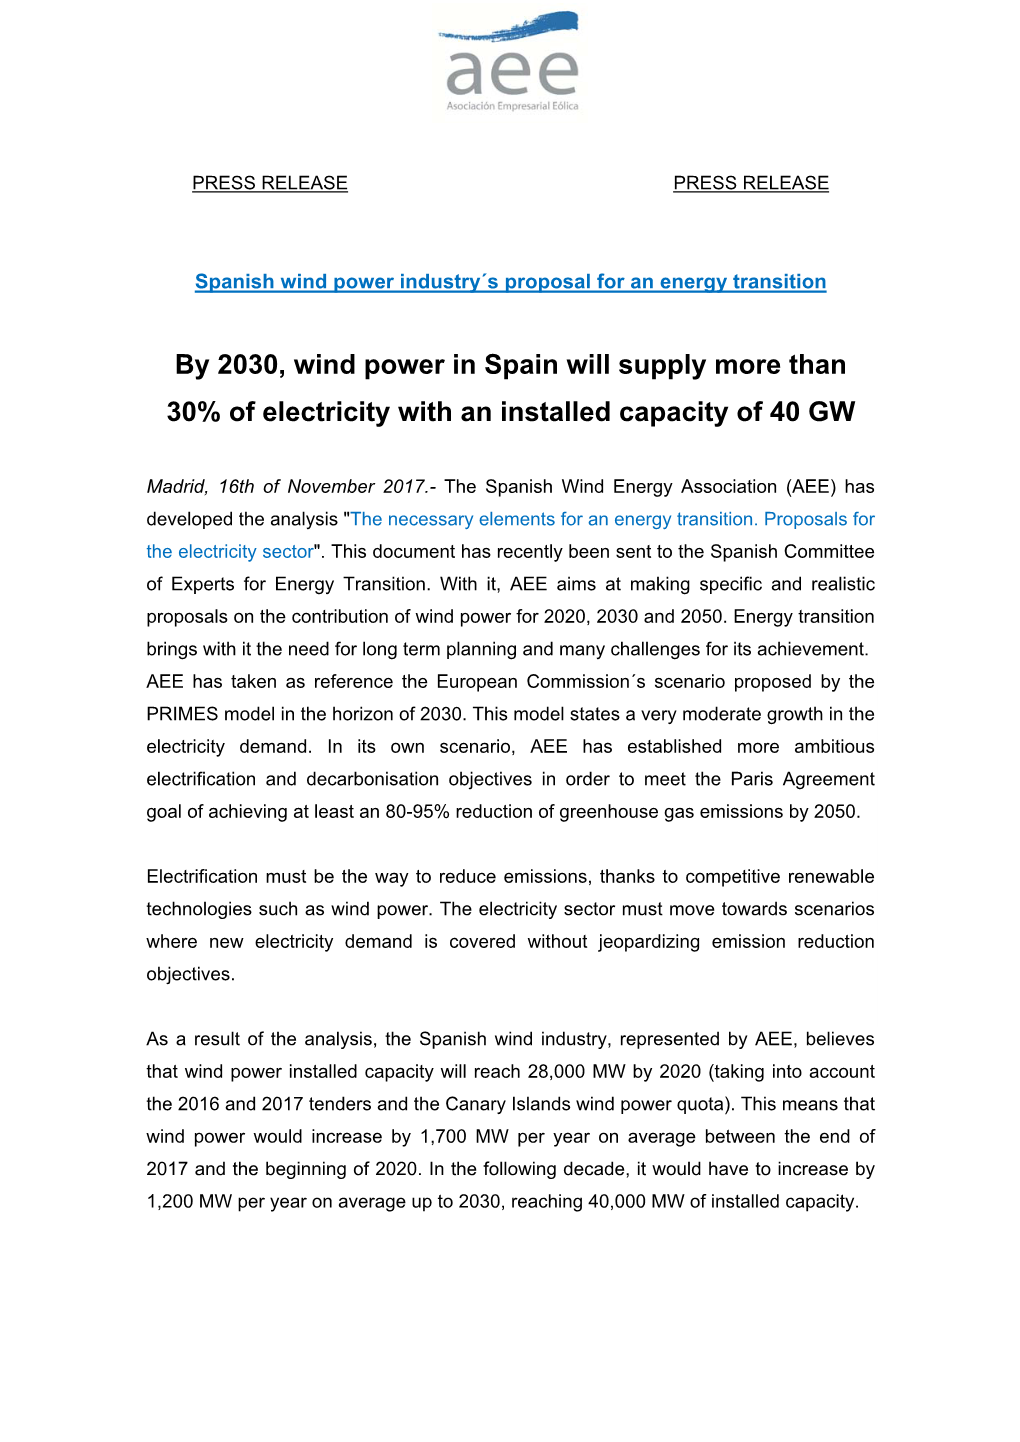 By 2030, Wind Power in Spain Will Supply More Than 30% of Electricity with an Installed Capacity of 40 GW